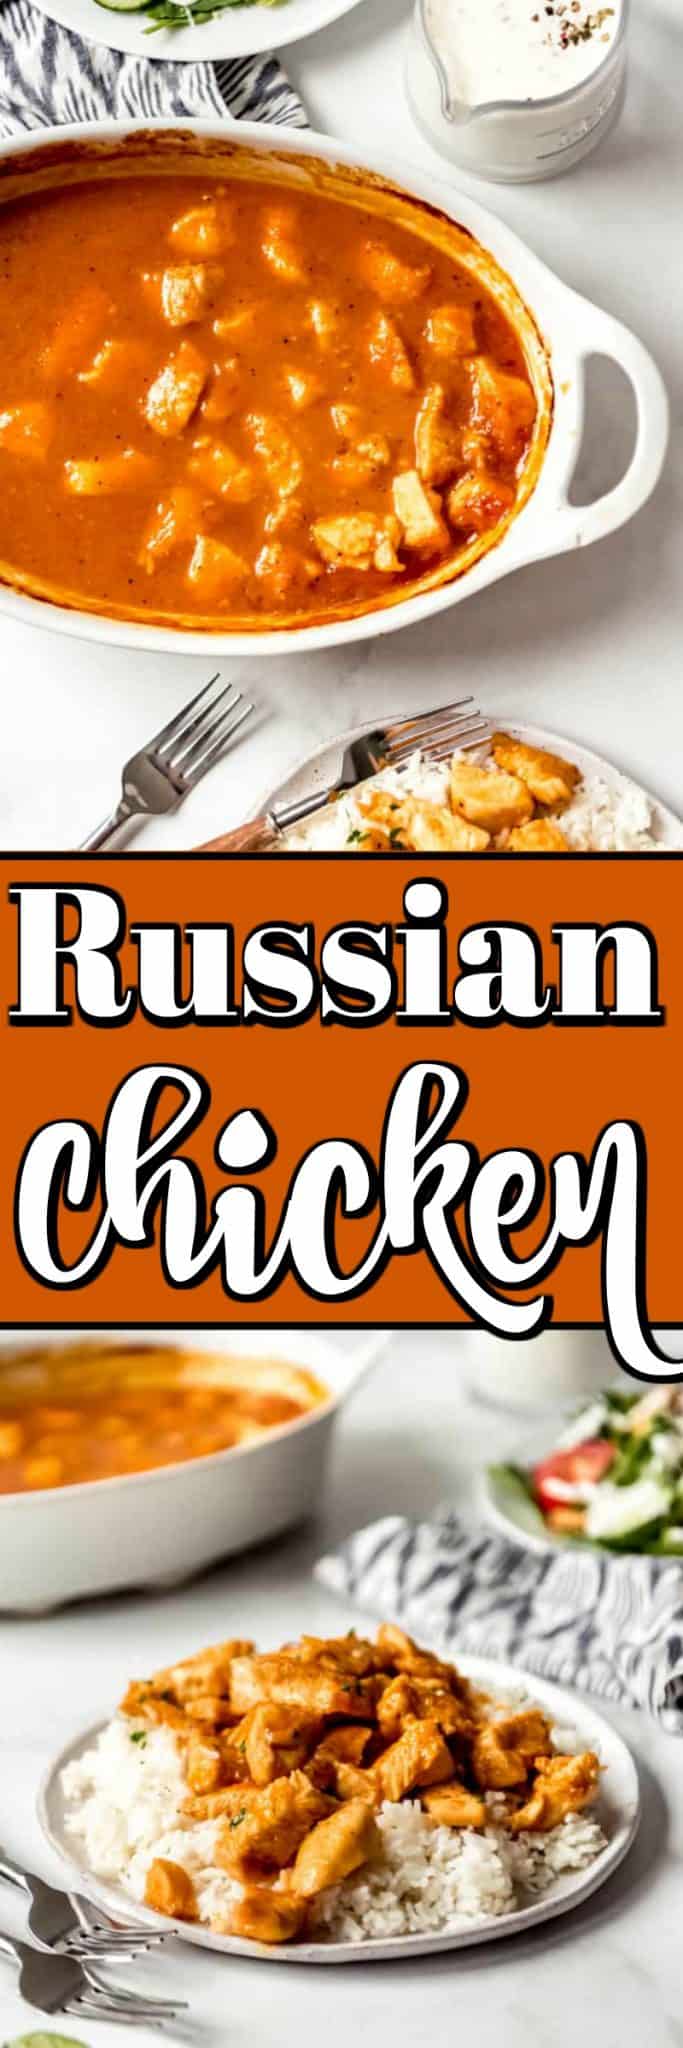 Russian Chicken - Sweet & Tangy Chicken - Noshing With the Nolands